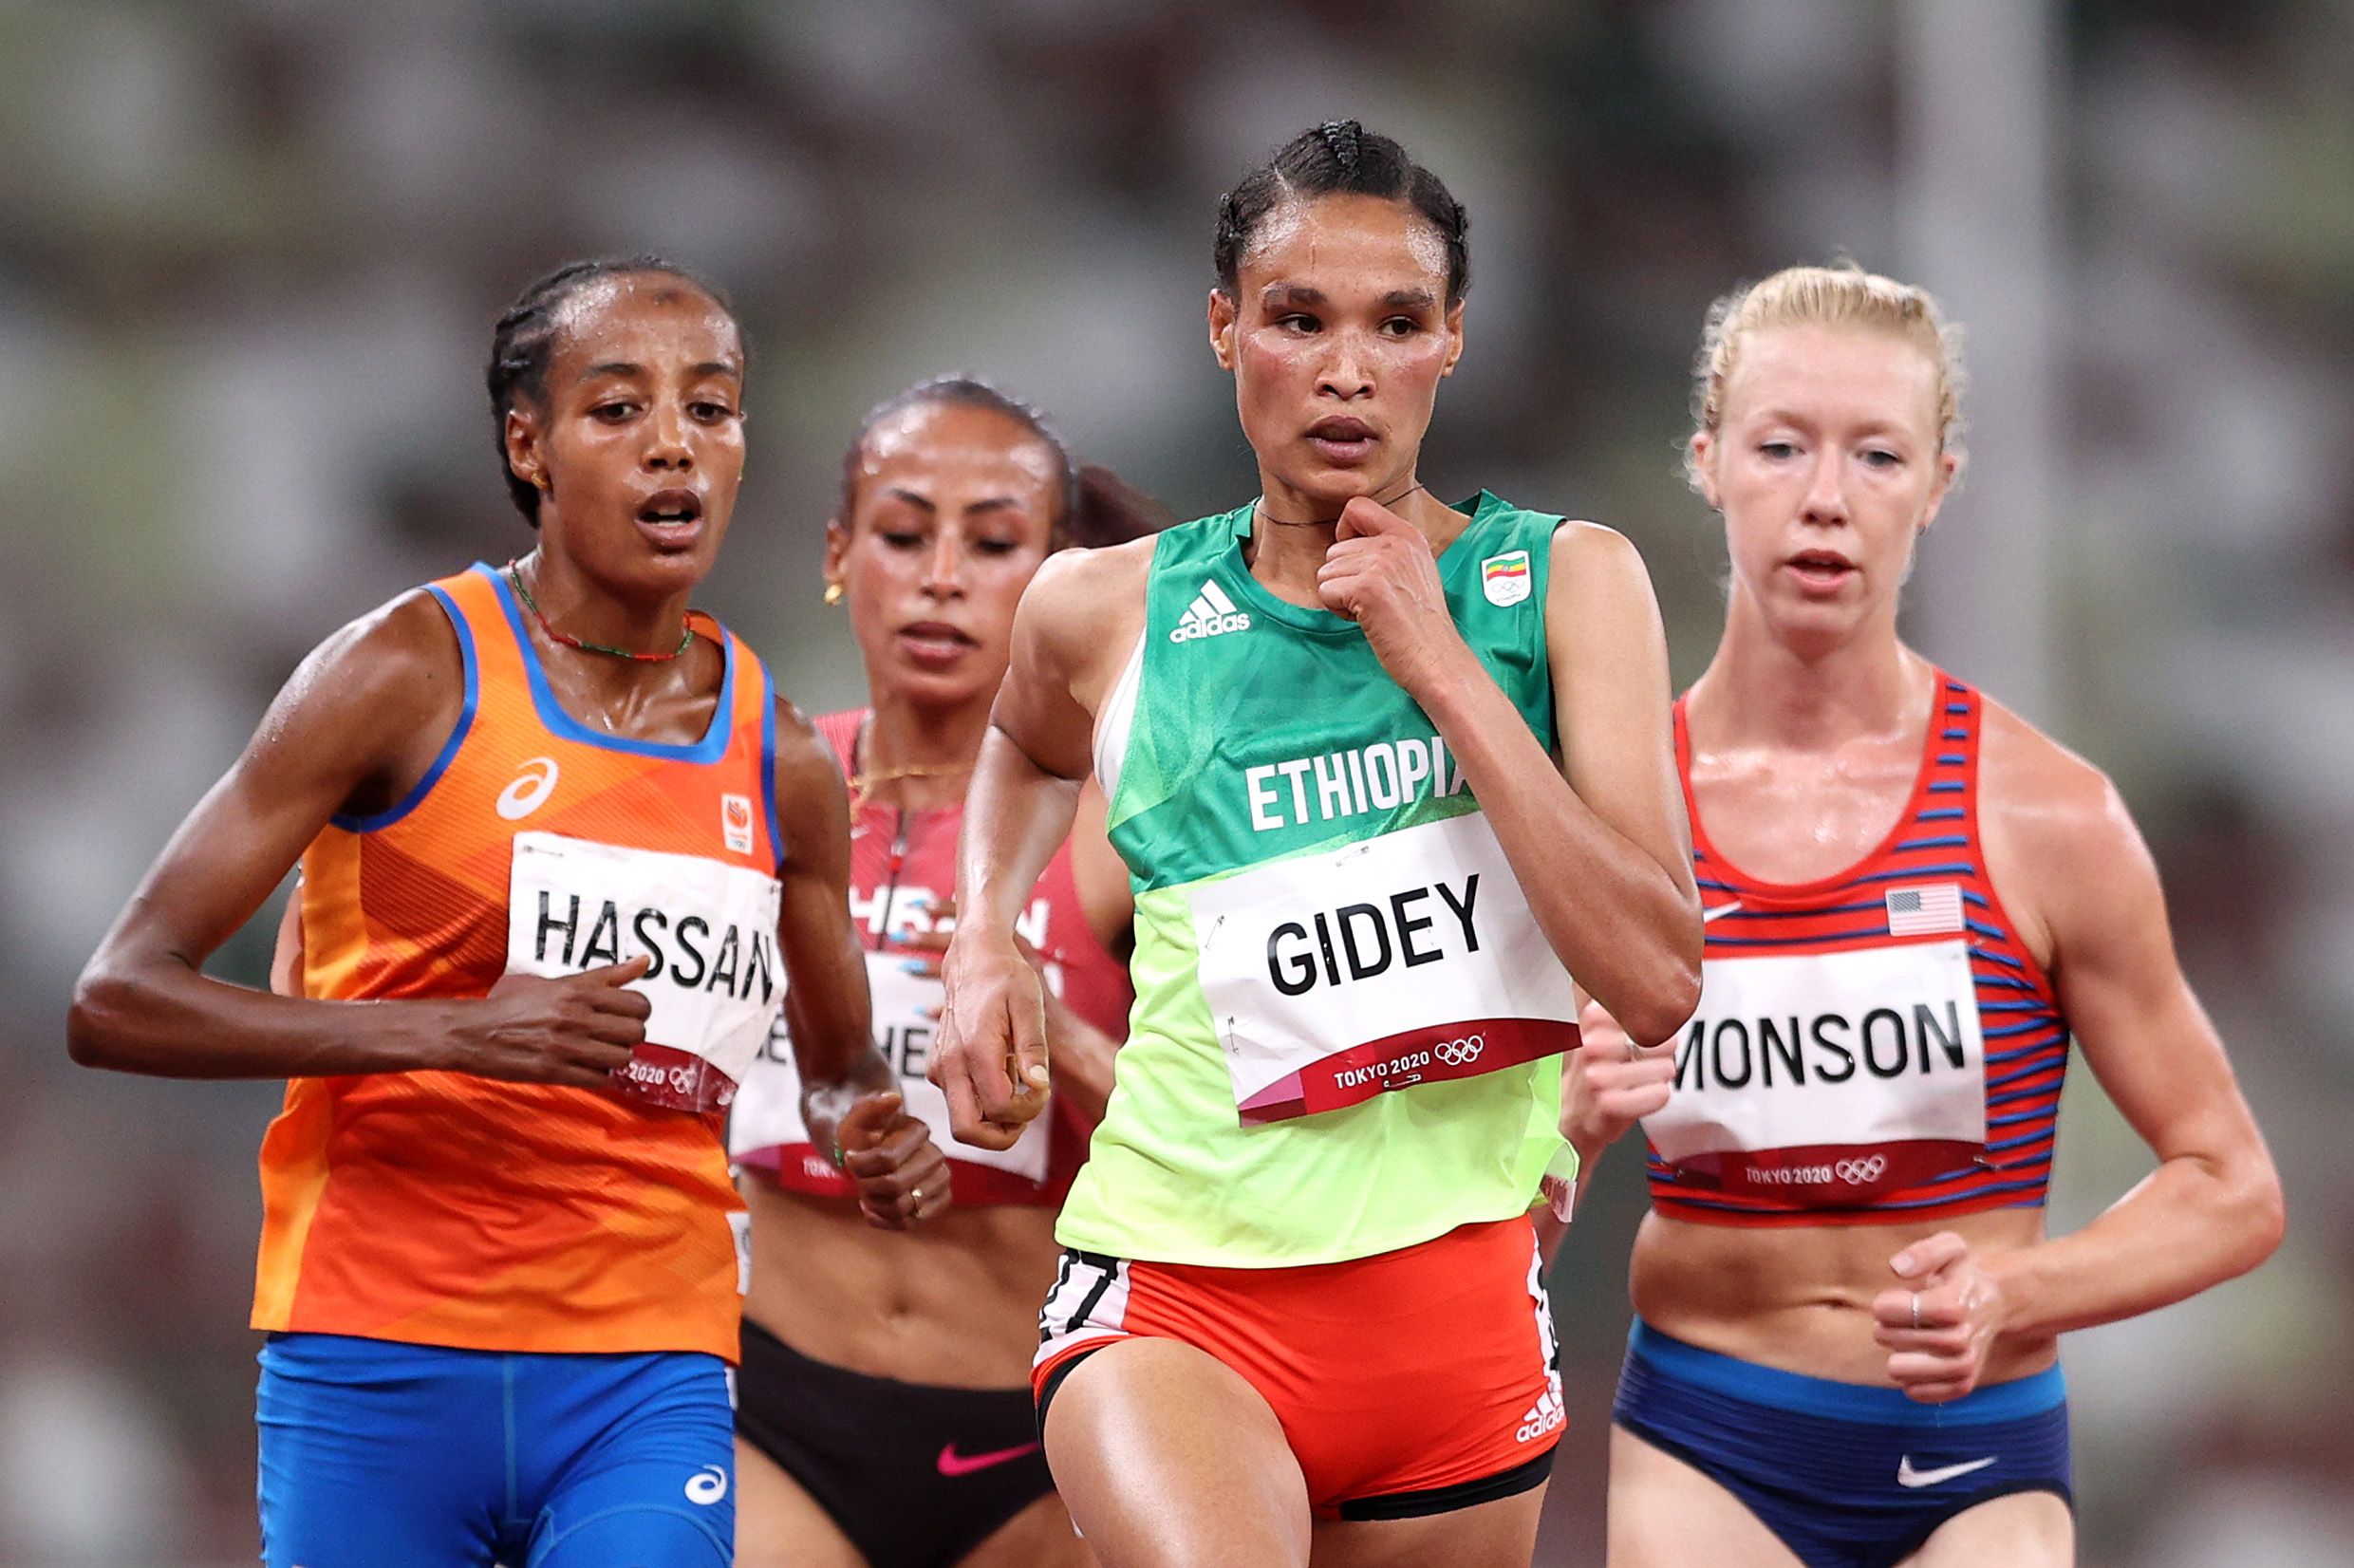 What to Watch at the 2022 World Athletics Championships